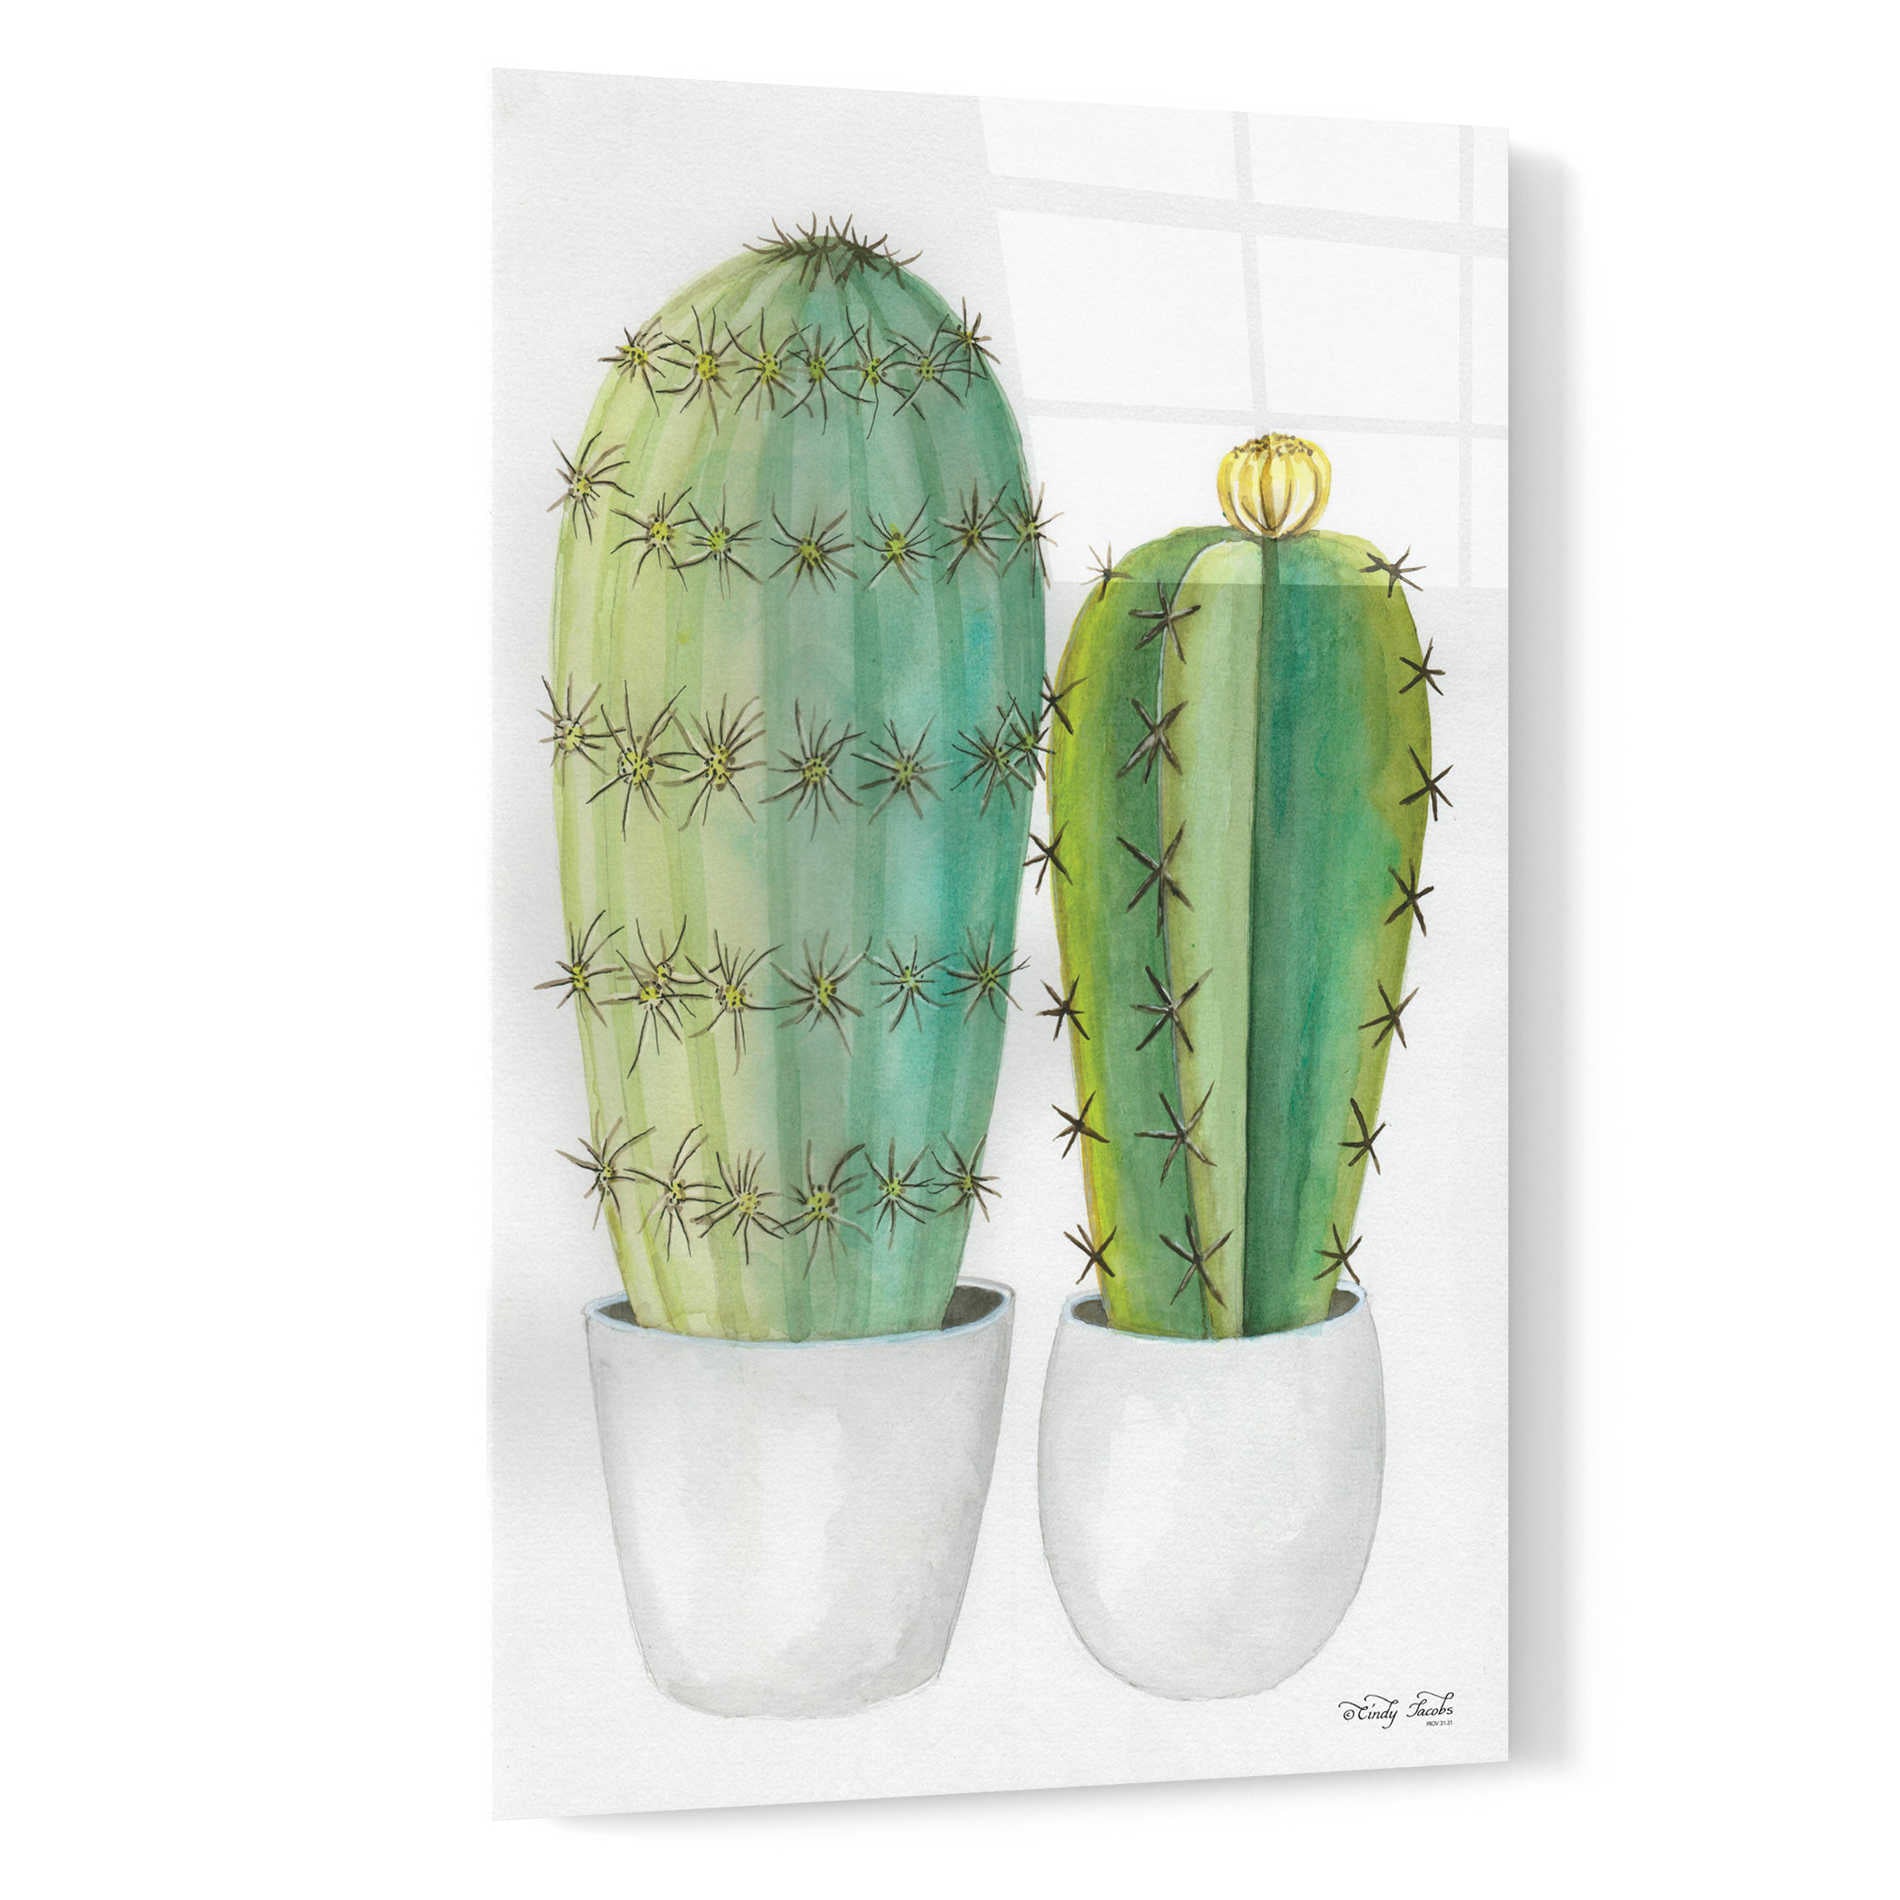 Epic Art 'Cactus Love' by Cindy Jacobs, Acrylic Glass Wall Art,16x24